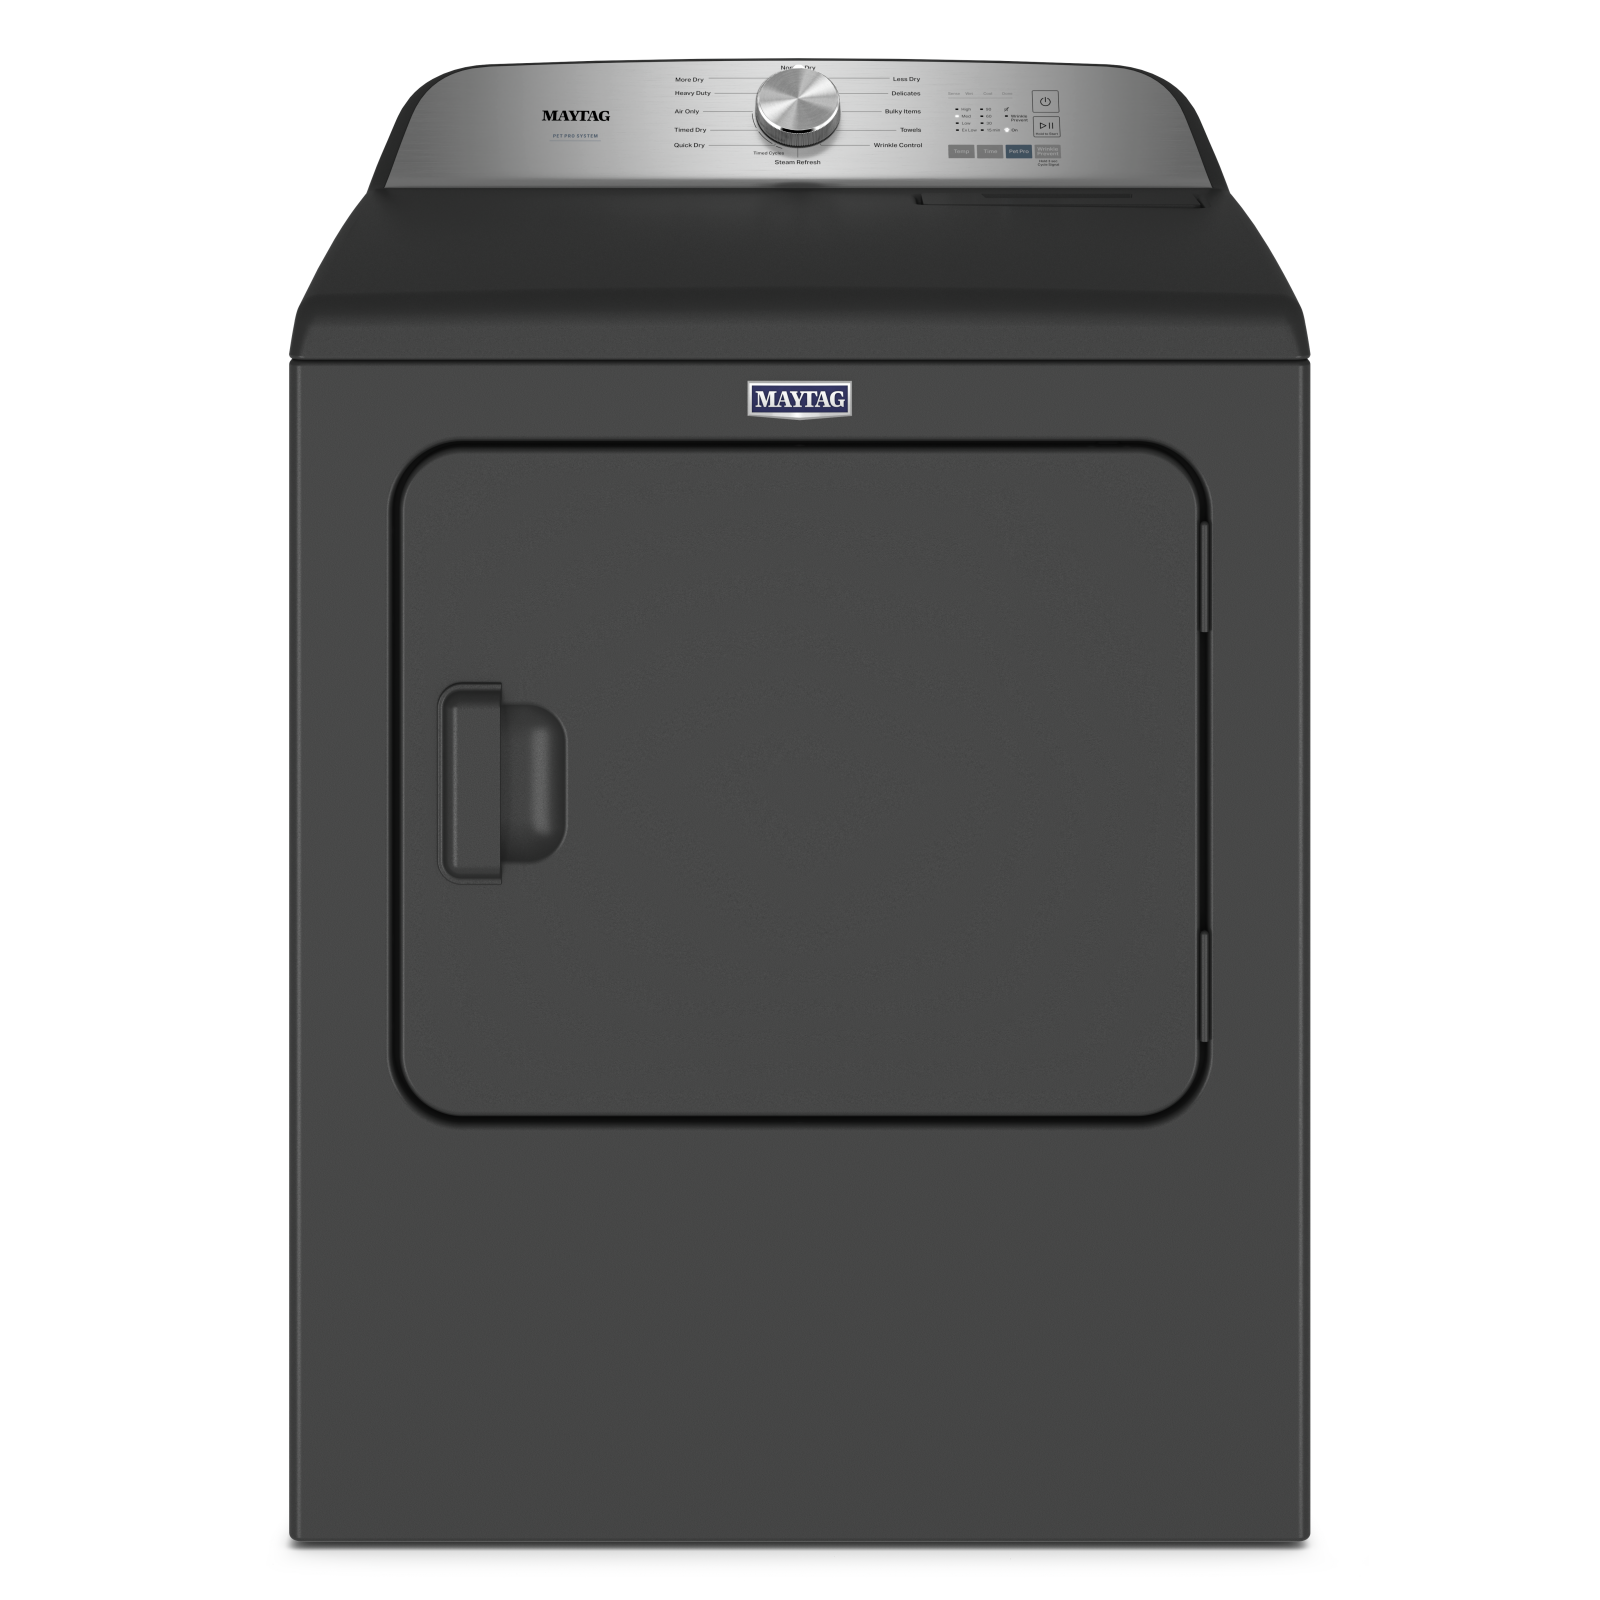 Maytag - Pet Pro 7 cu. Ft  Electric Dryer in Black - YMED6500MBK